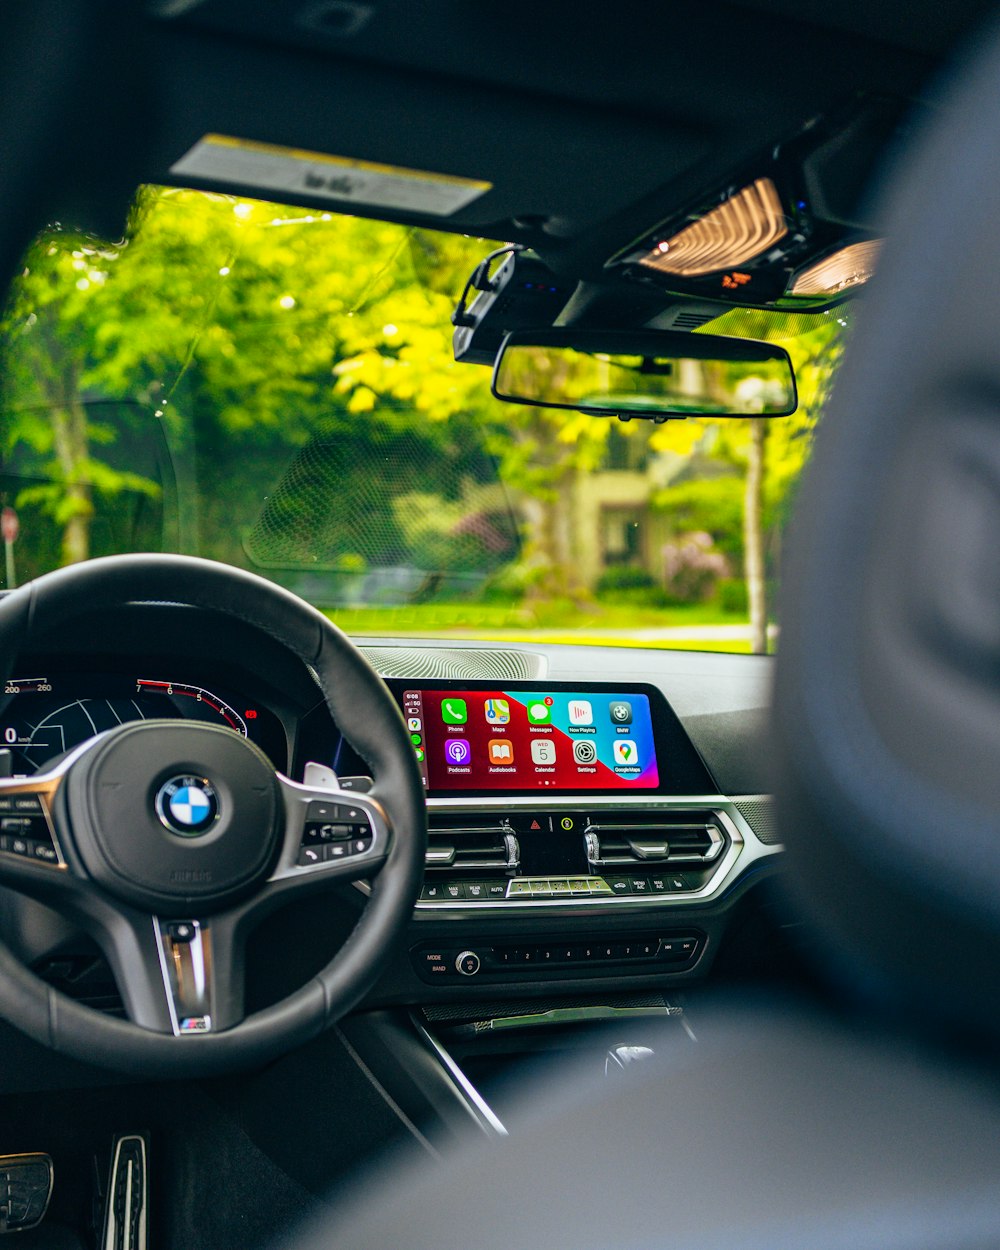 Bmw Interior Pictures | Download Free Images on Unsplash